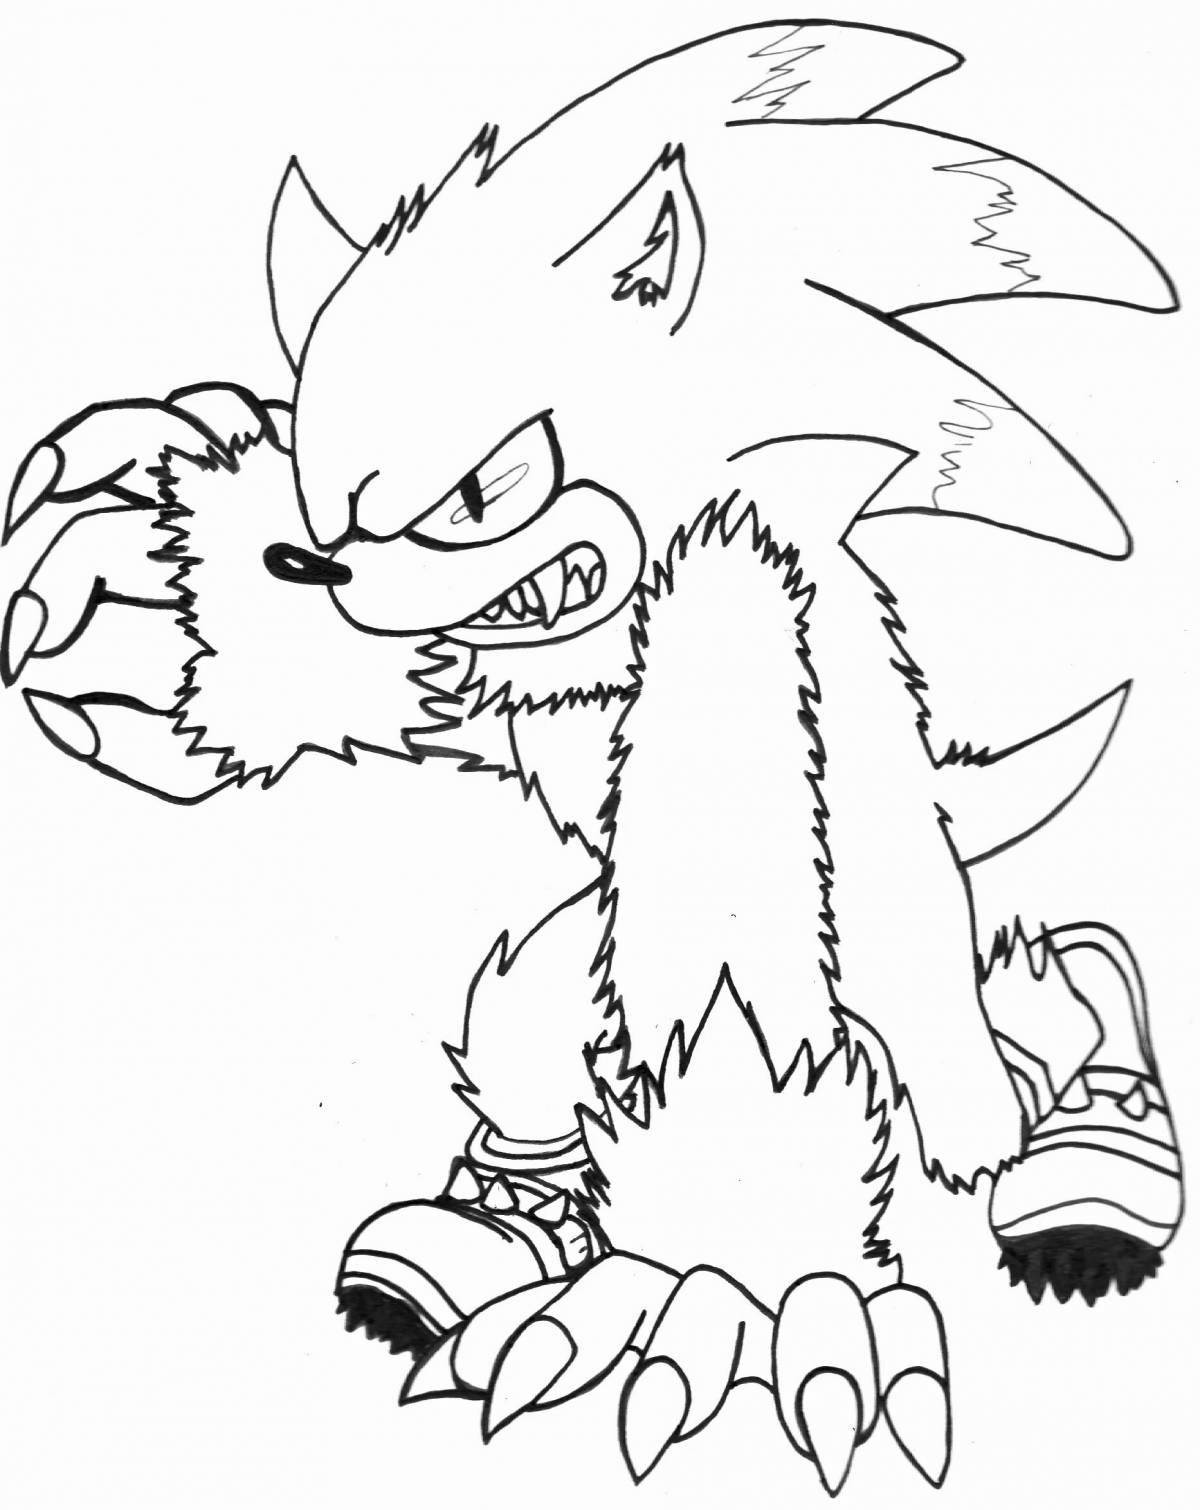 Sonic werewolf playful coloring